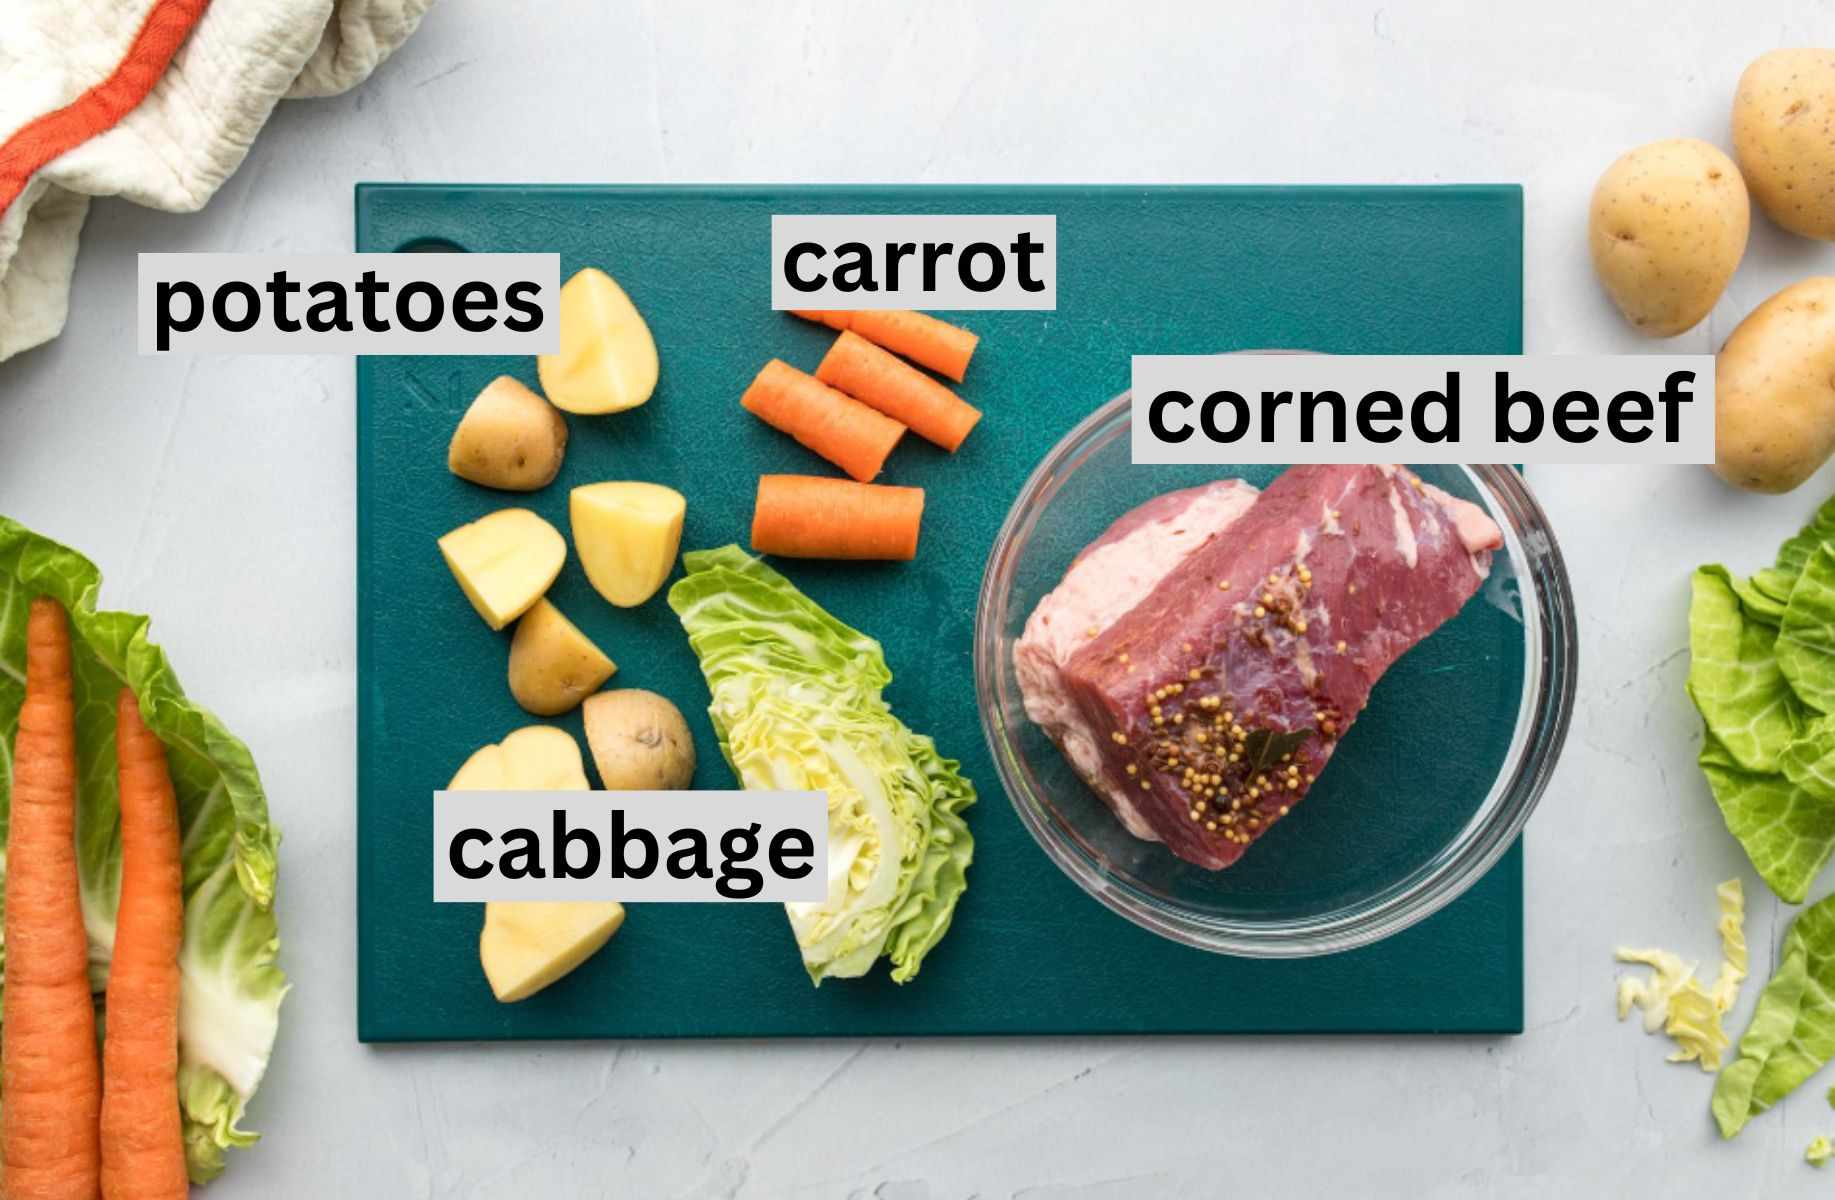 corned beef ingredients on cutting board